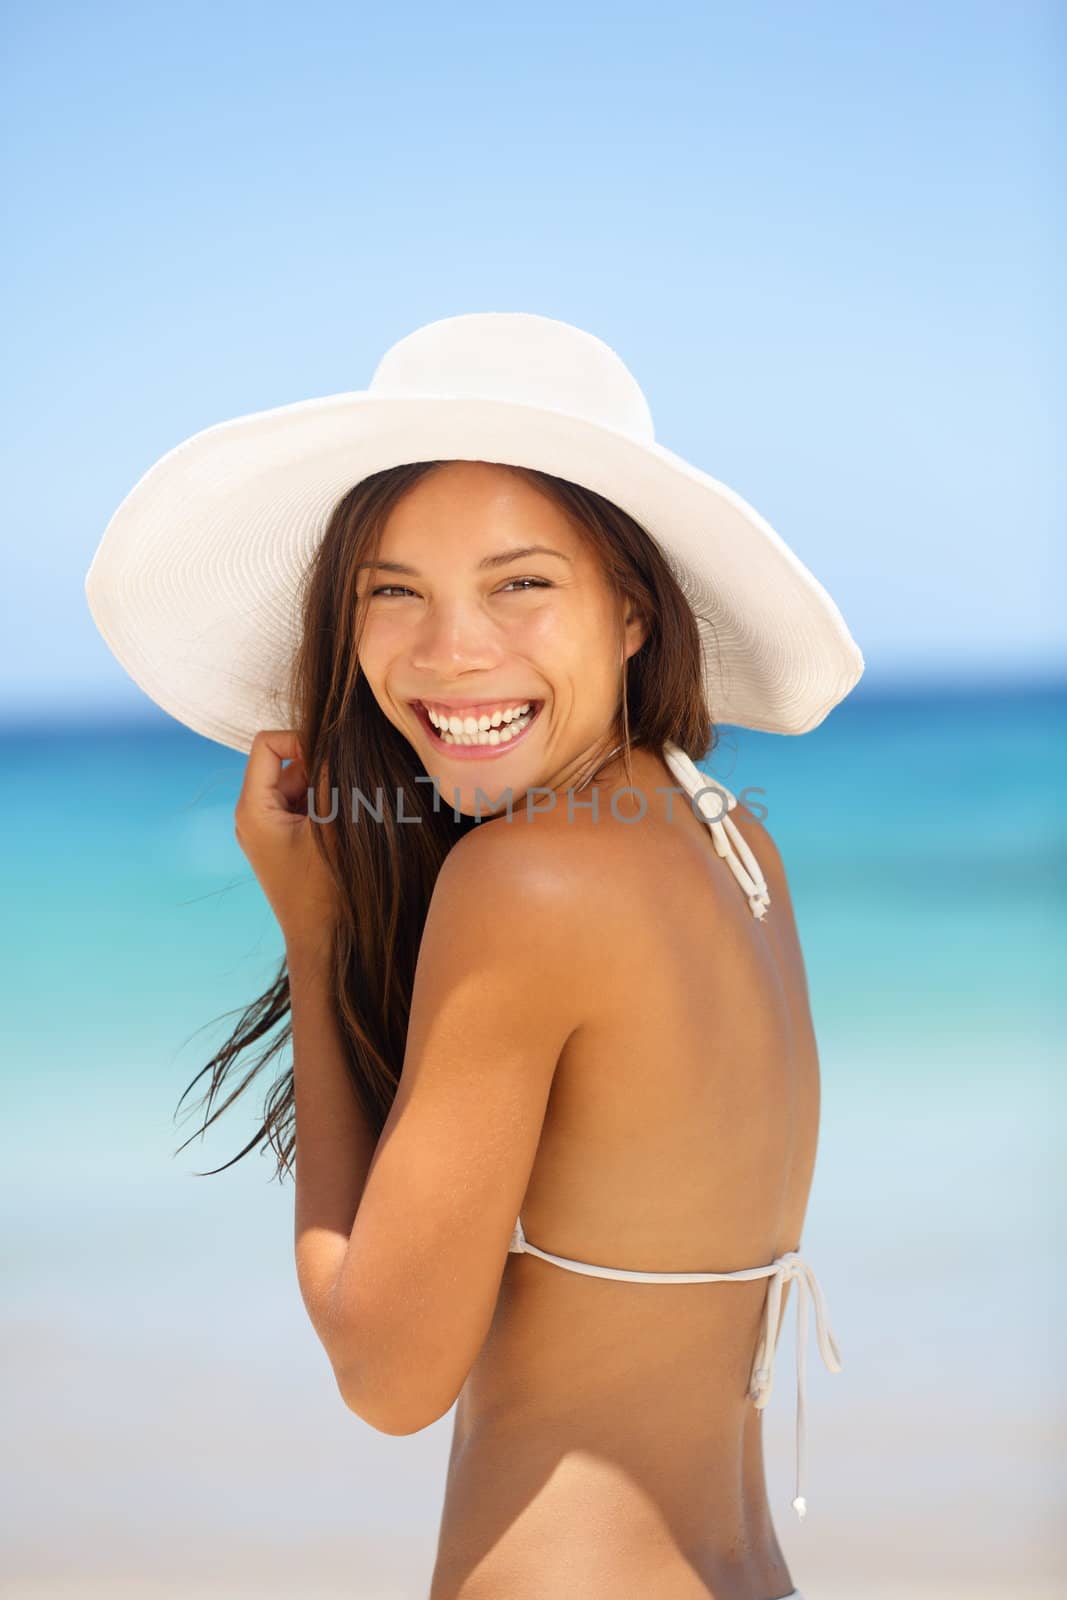 Asian woman beach portrait. Happy lifestyle photo of mixed race Asian Chinese / Caucasian young lady in bikini smiling pretty wearing beach hat on summer holiday vacation.